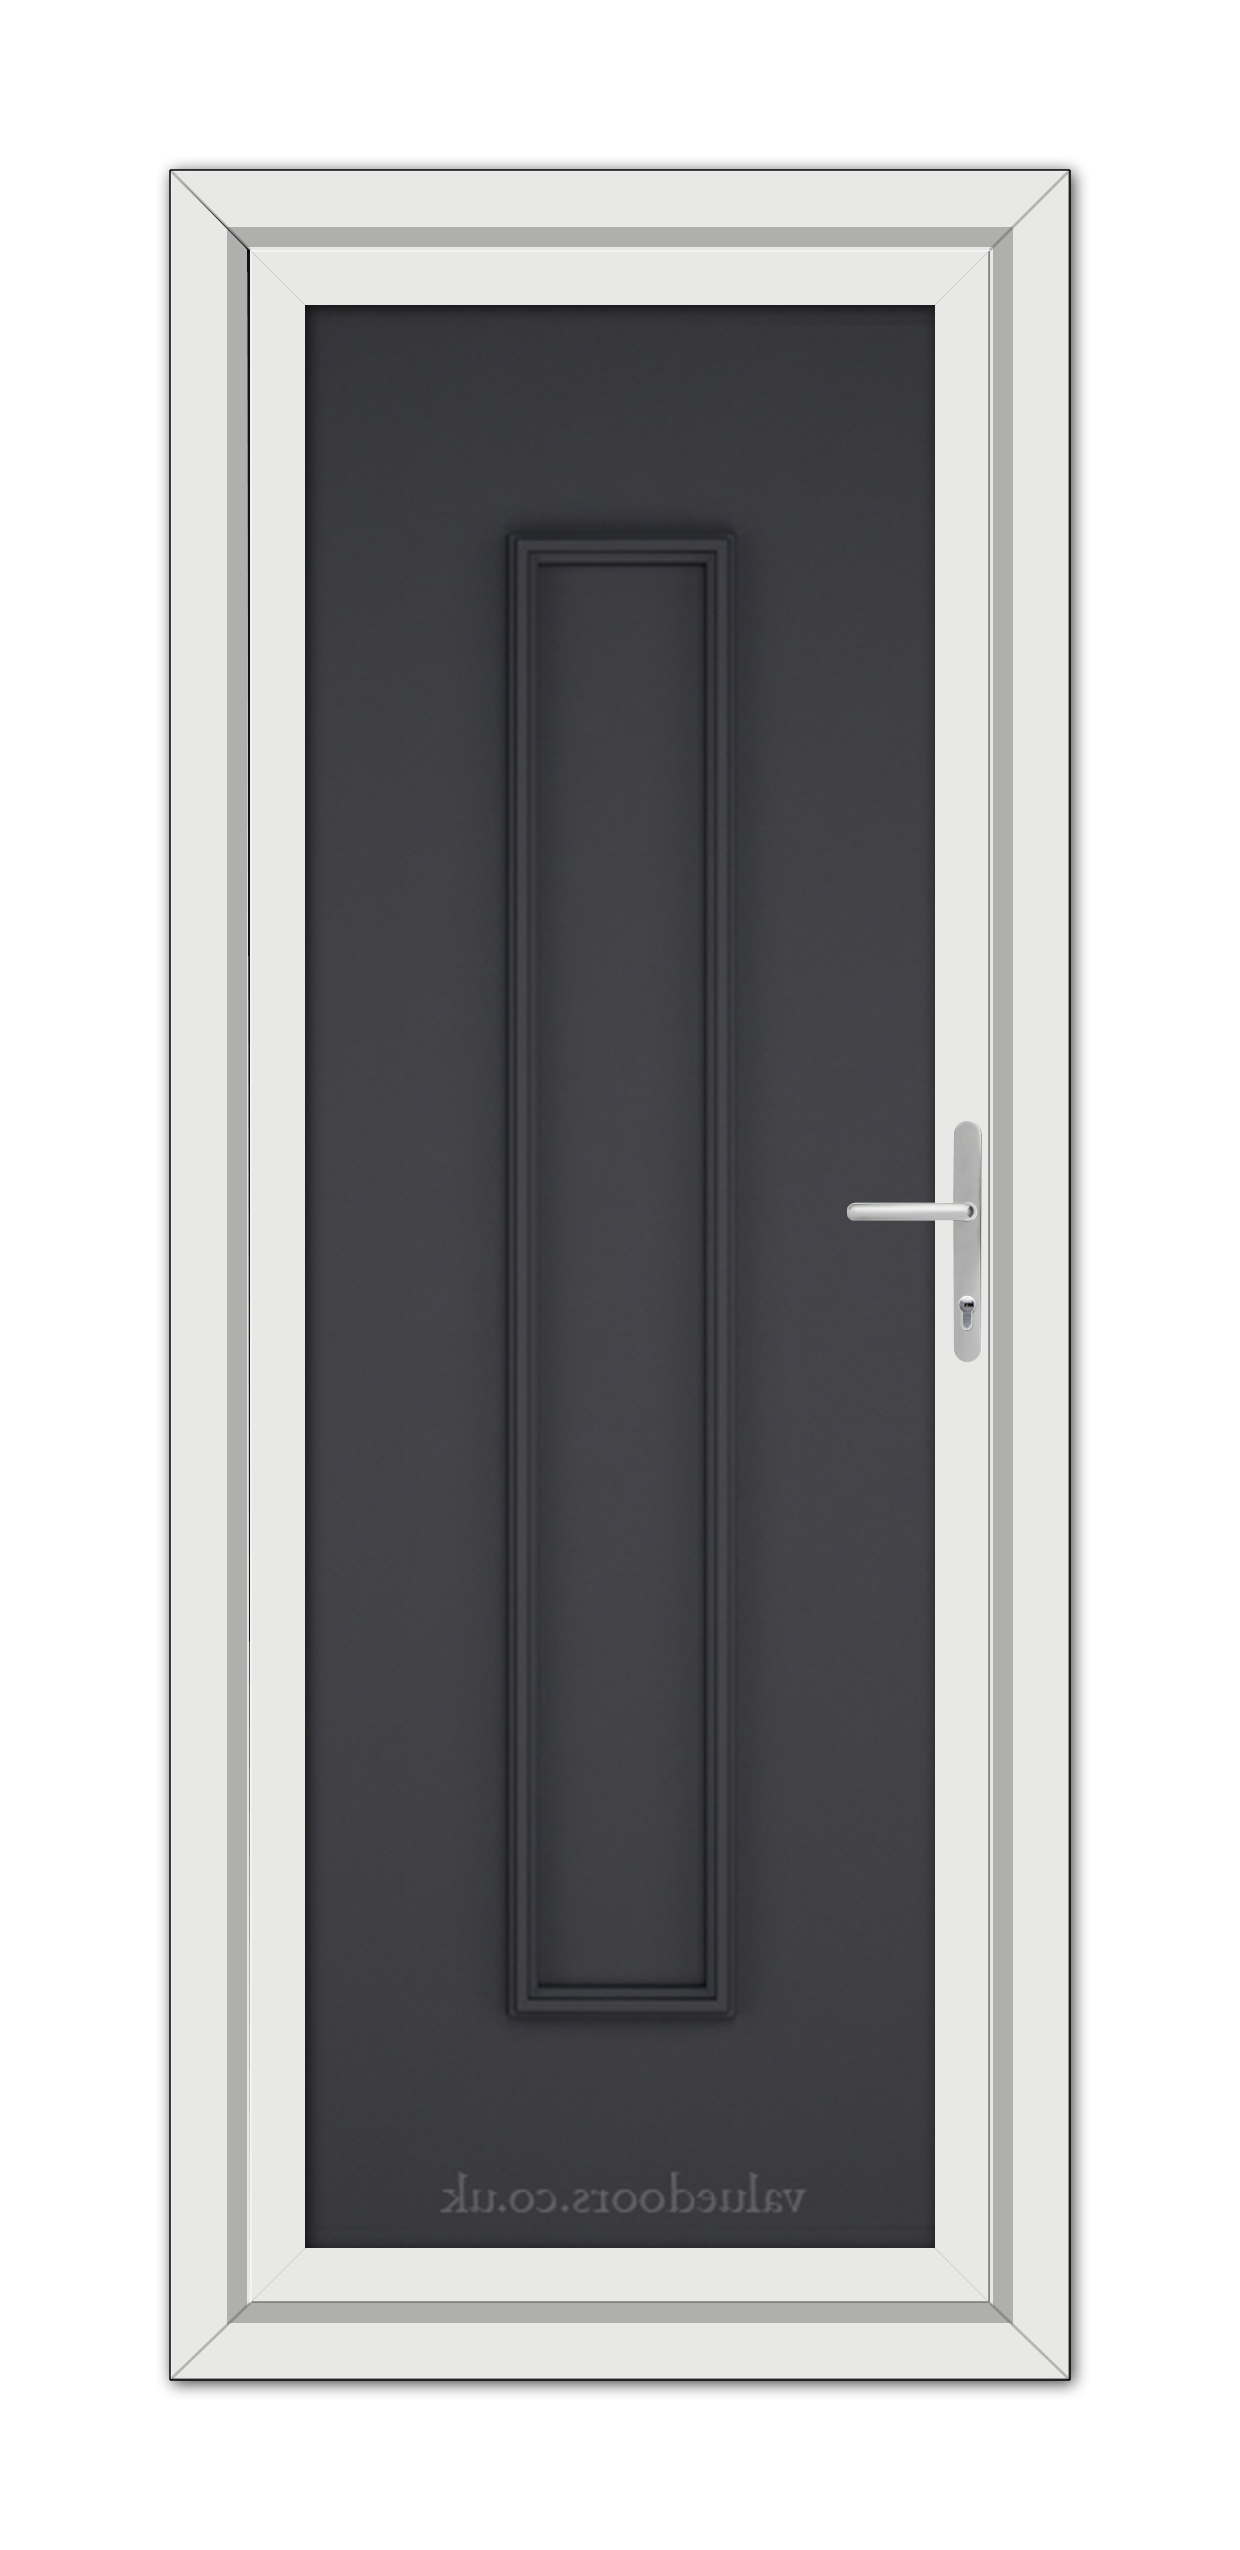 Modern closed Grey Rome Solid uPVC Door with a dark gray panel, silver handle, and white frame, viewed from the front.